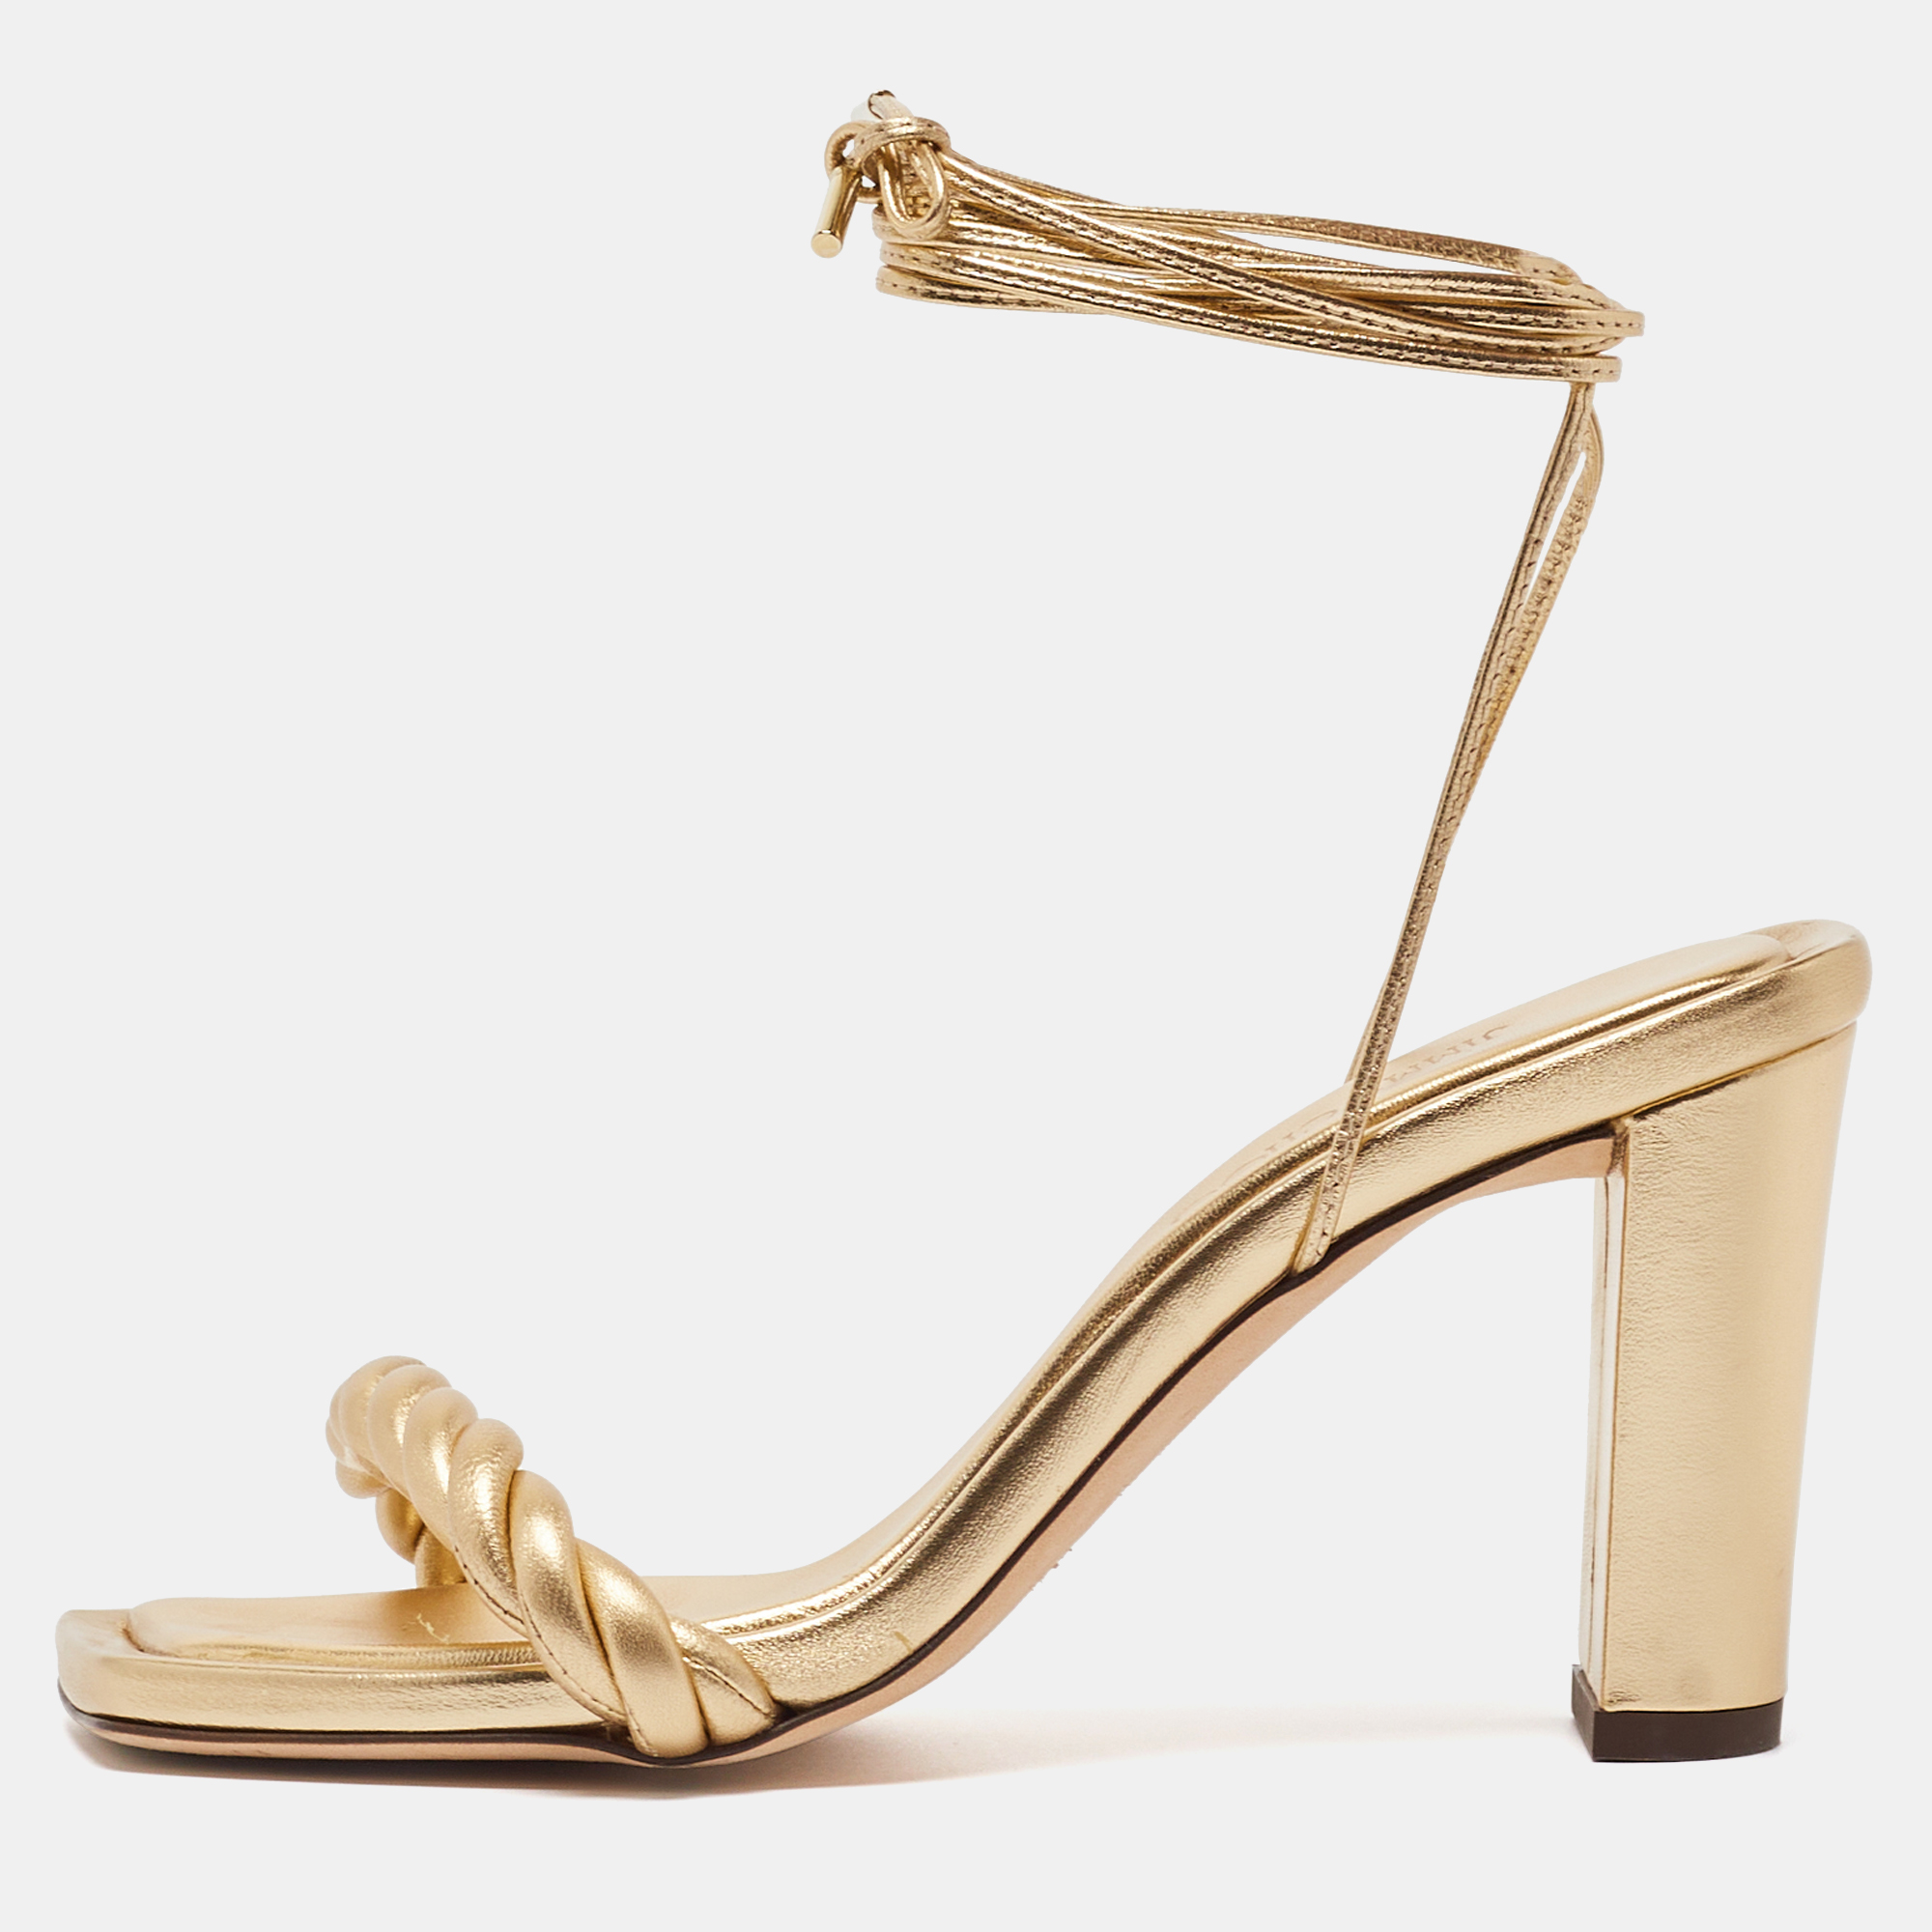 Jimmy choo metallic gold leather diosa twisted slide sandals size 37